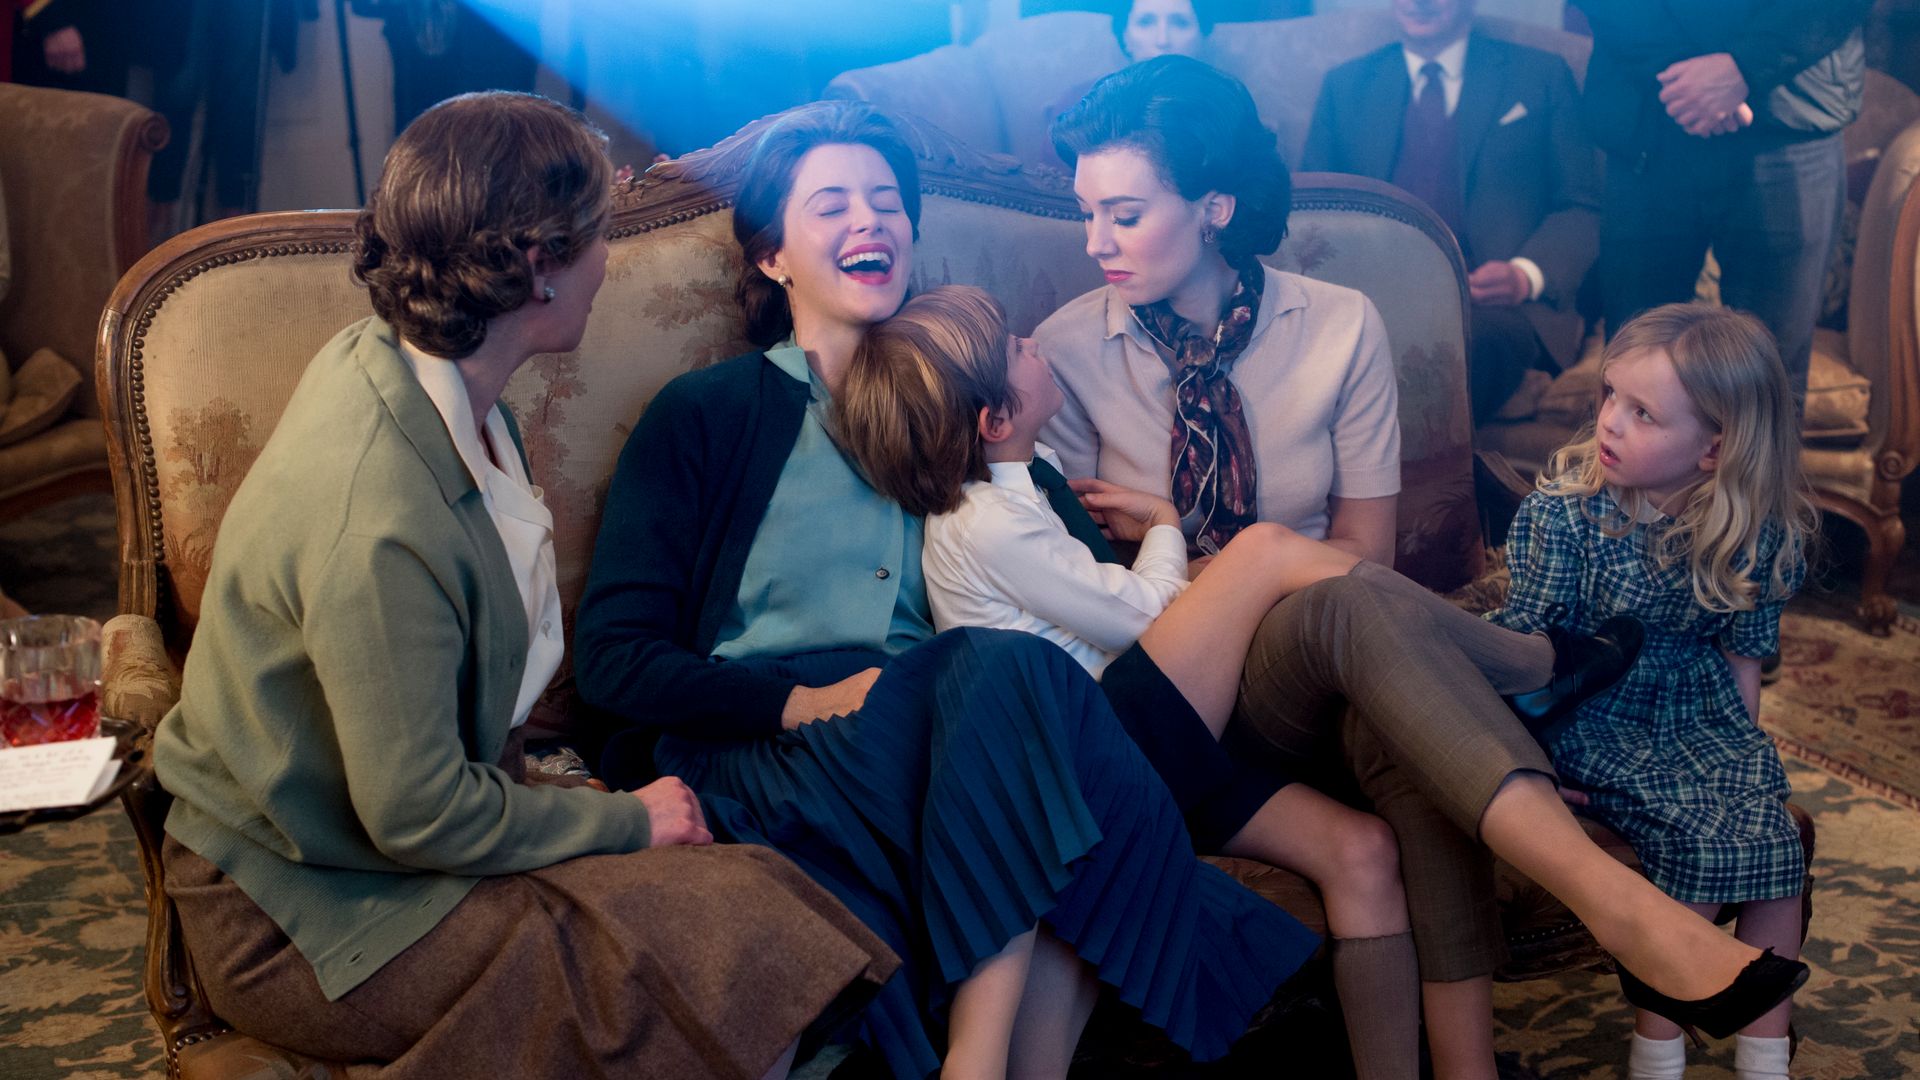 Cast of The Crown season one in character laughing on a sofa